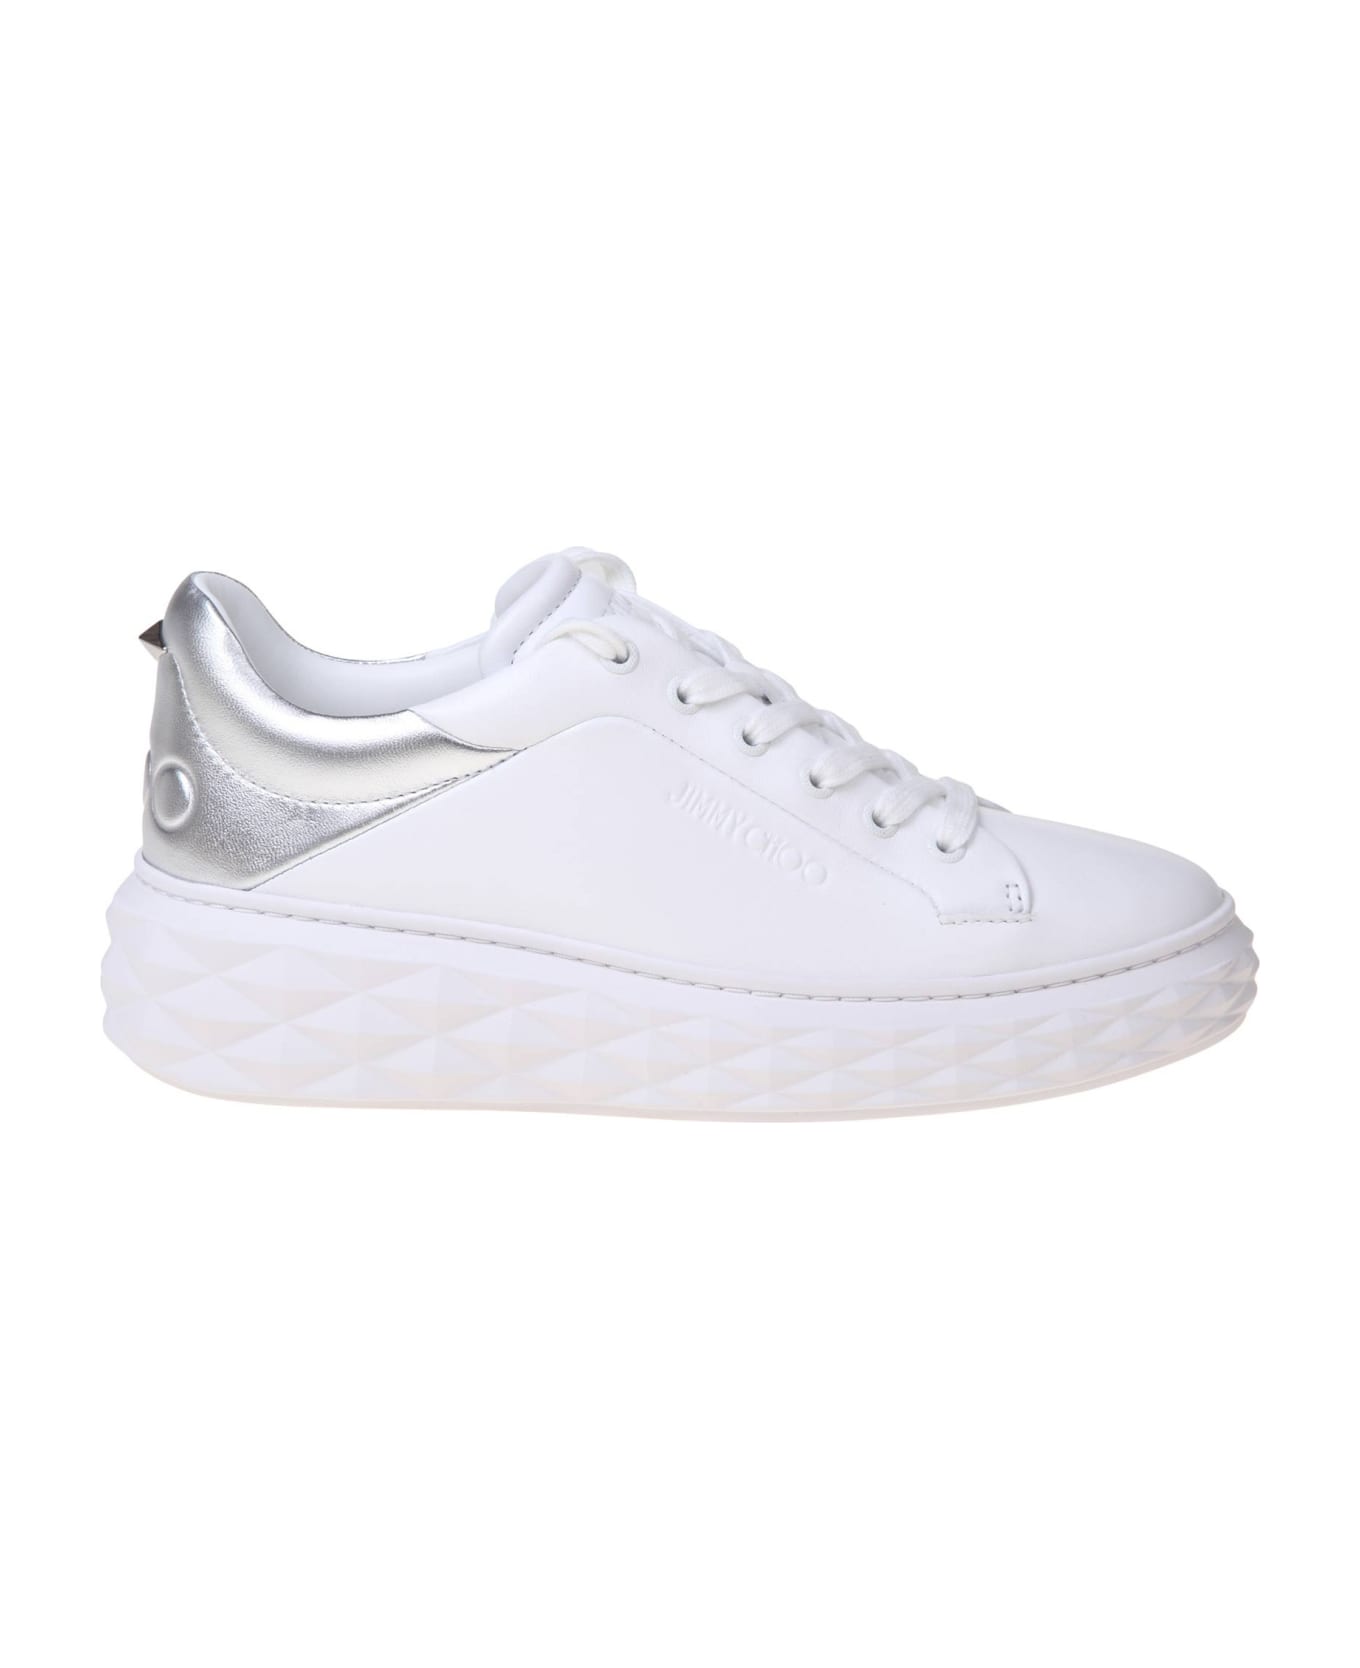 Jimmy Choo Diamond Maxi Sneakers In White And Silver Leather - White スニーカー